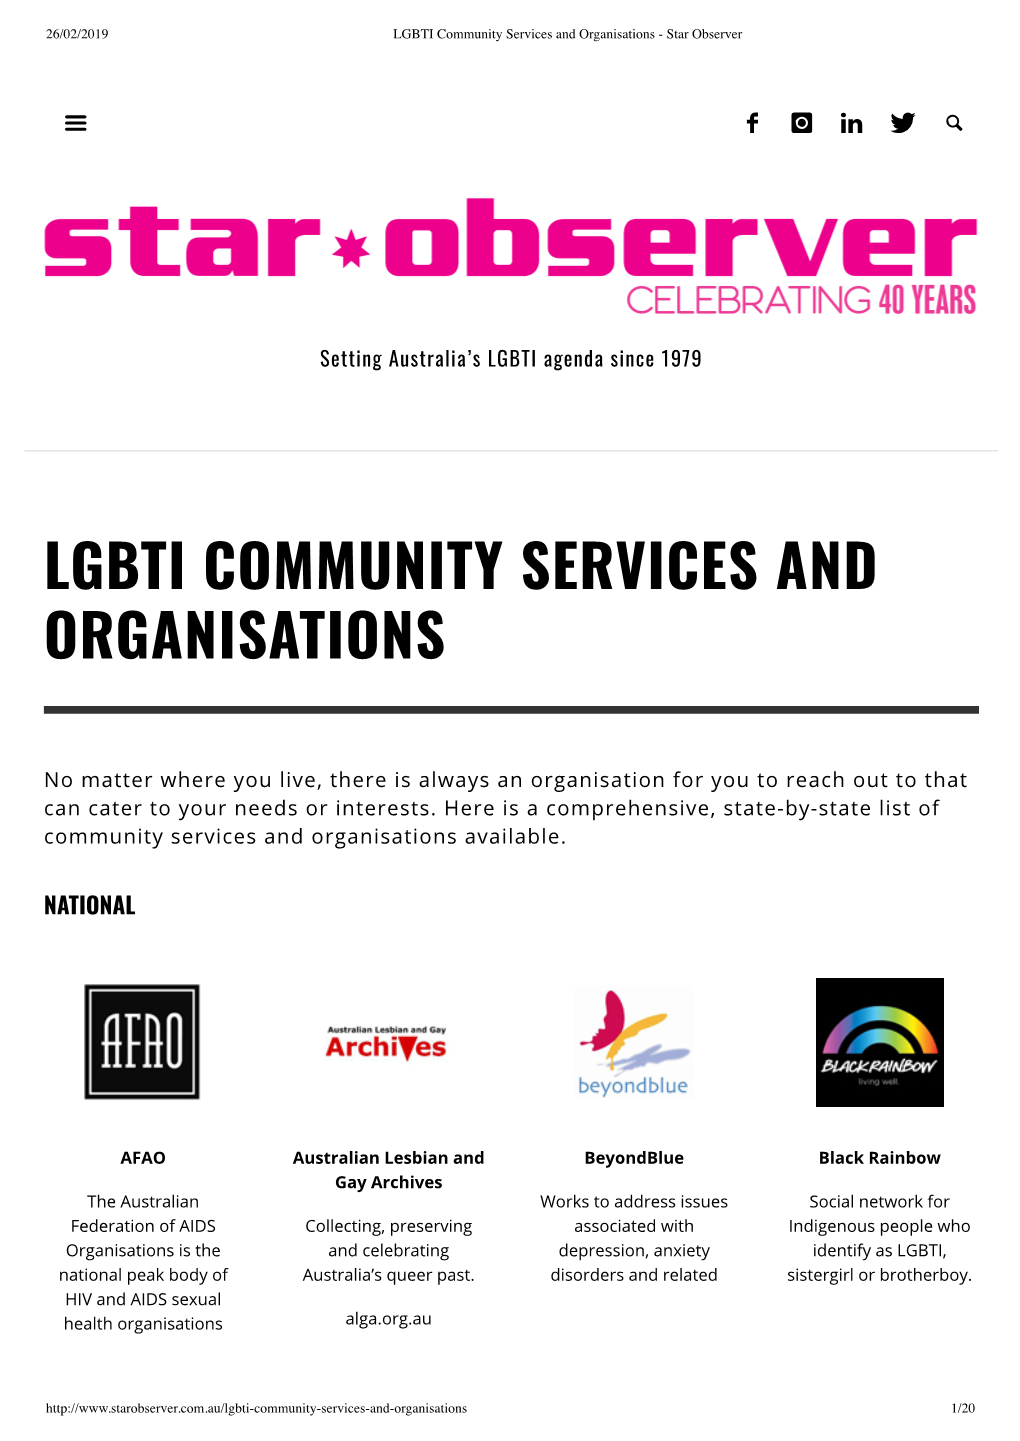 LGBTI Community Services and Organisations - Star Observer